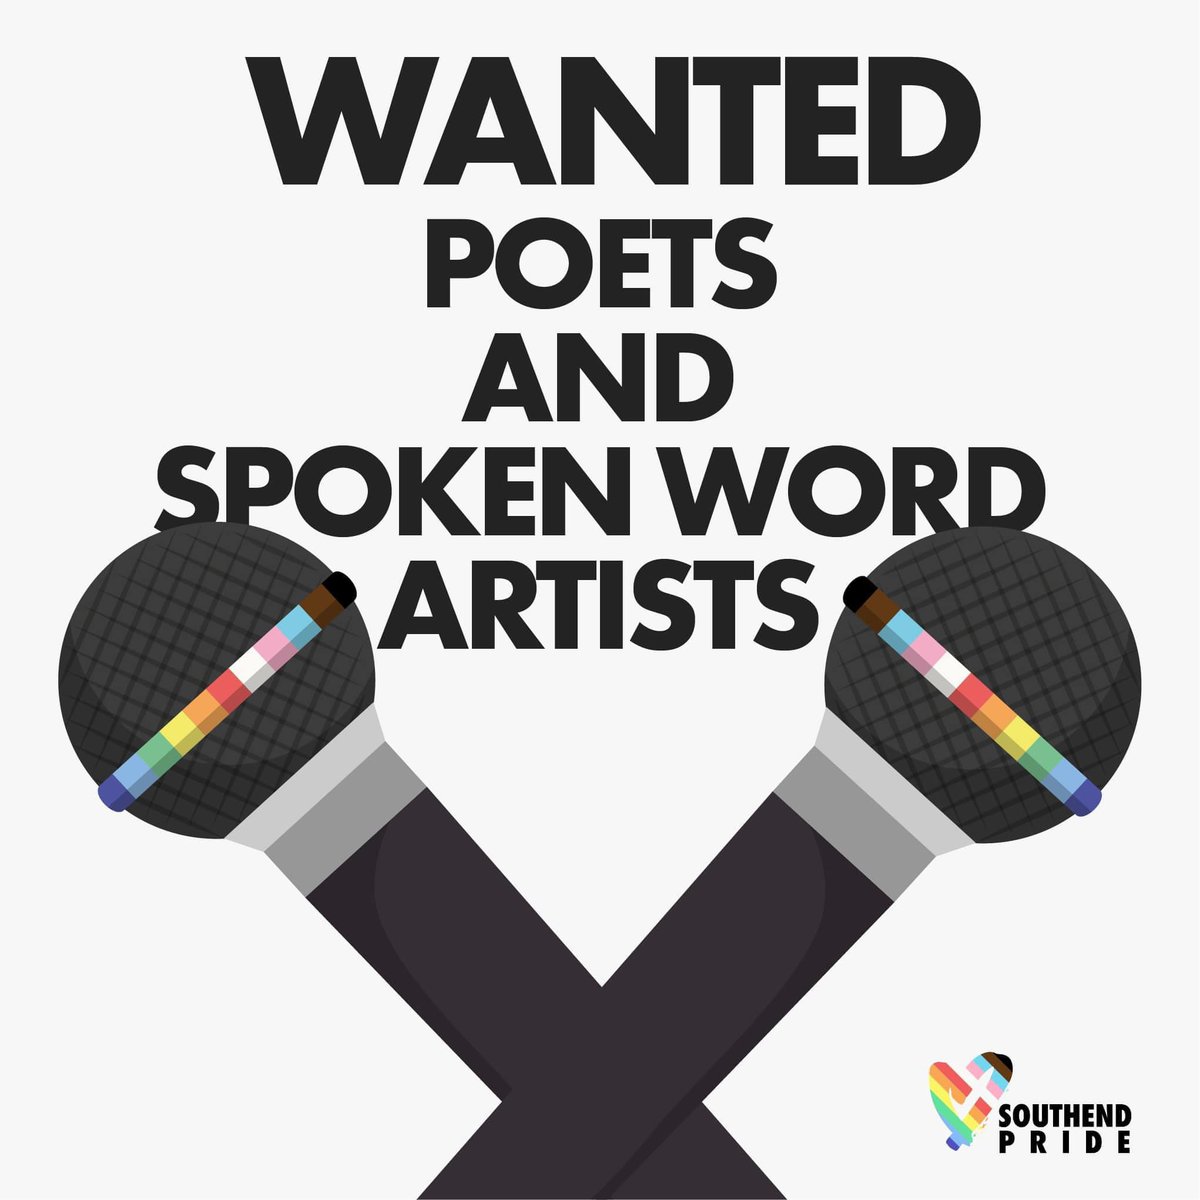 Poets/spoken word artists. You're wanted for a Proud Poetry event on 22nd Nov. Novice or experienced, young or old, all welcome. Email: info@southendpride.org.uk #Essex #southendpride #pride🌈 #lgbtq🌈 #southendonsea #southendonseaessex Southend Pride Charity 1202603